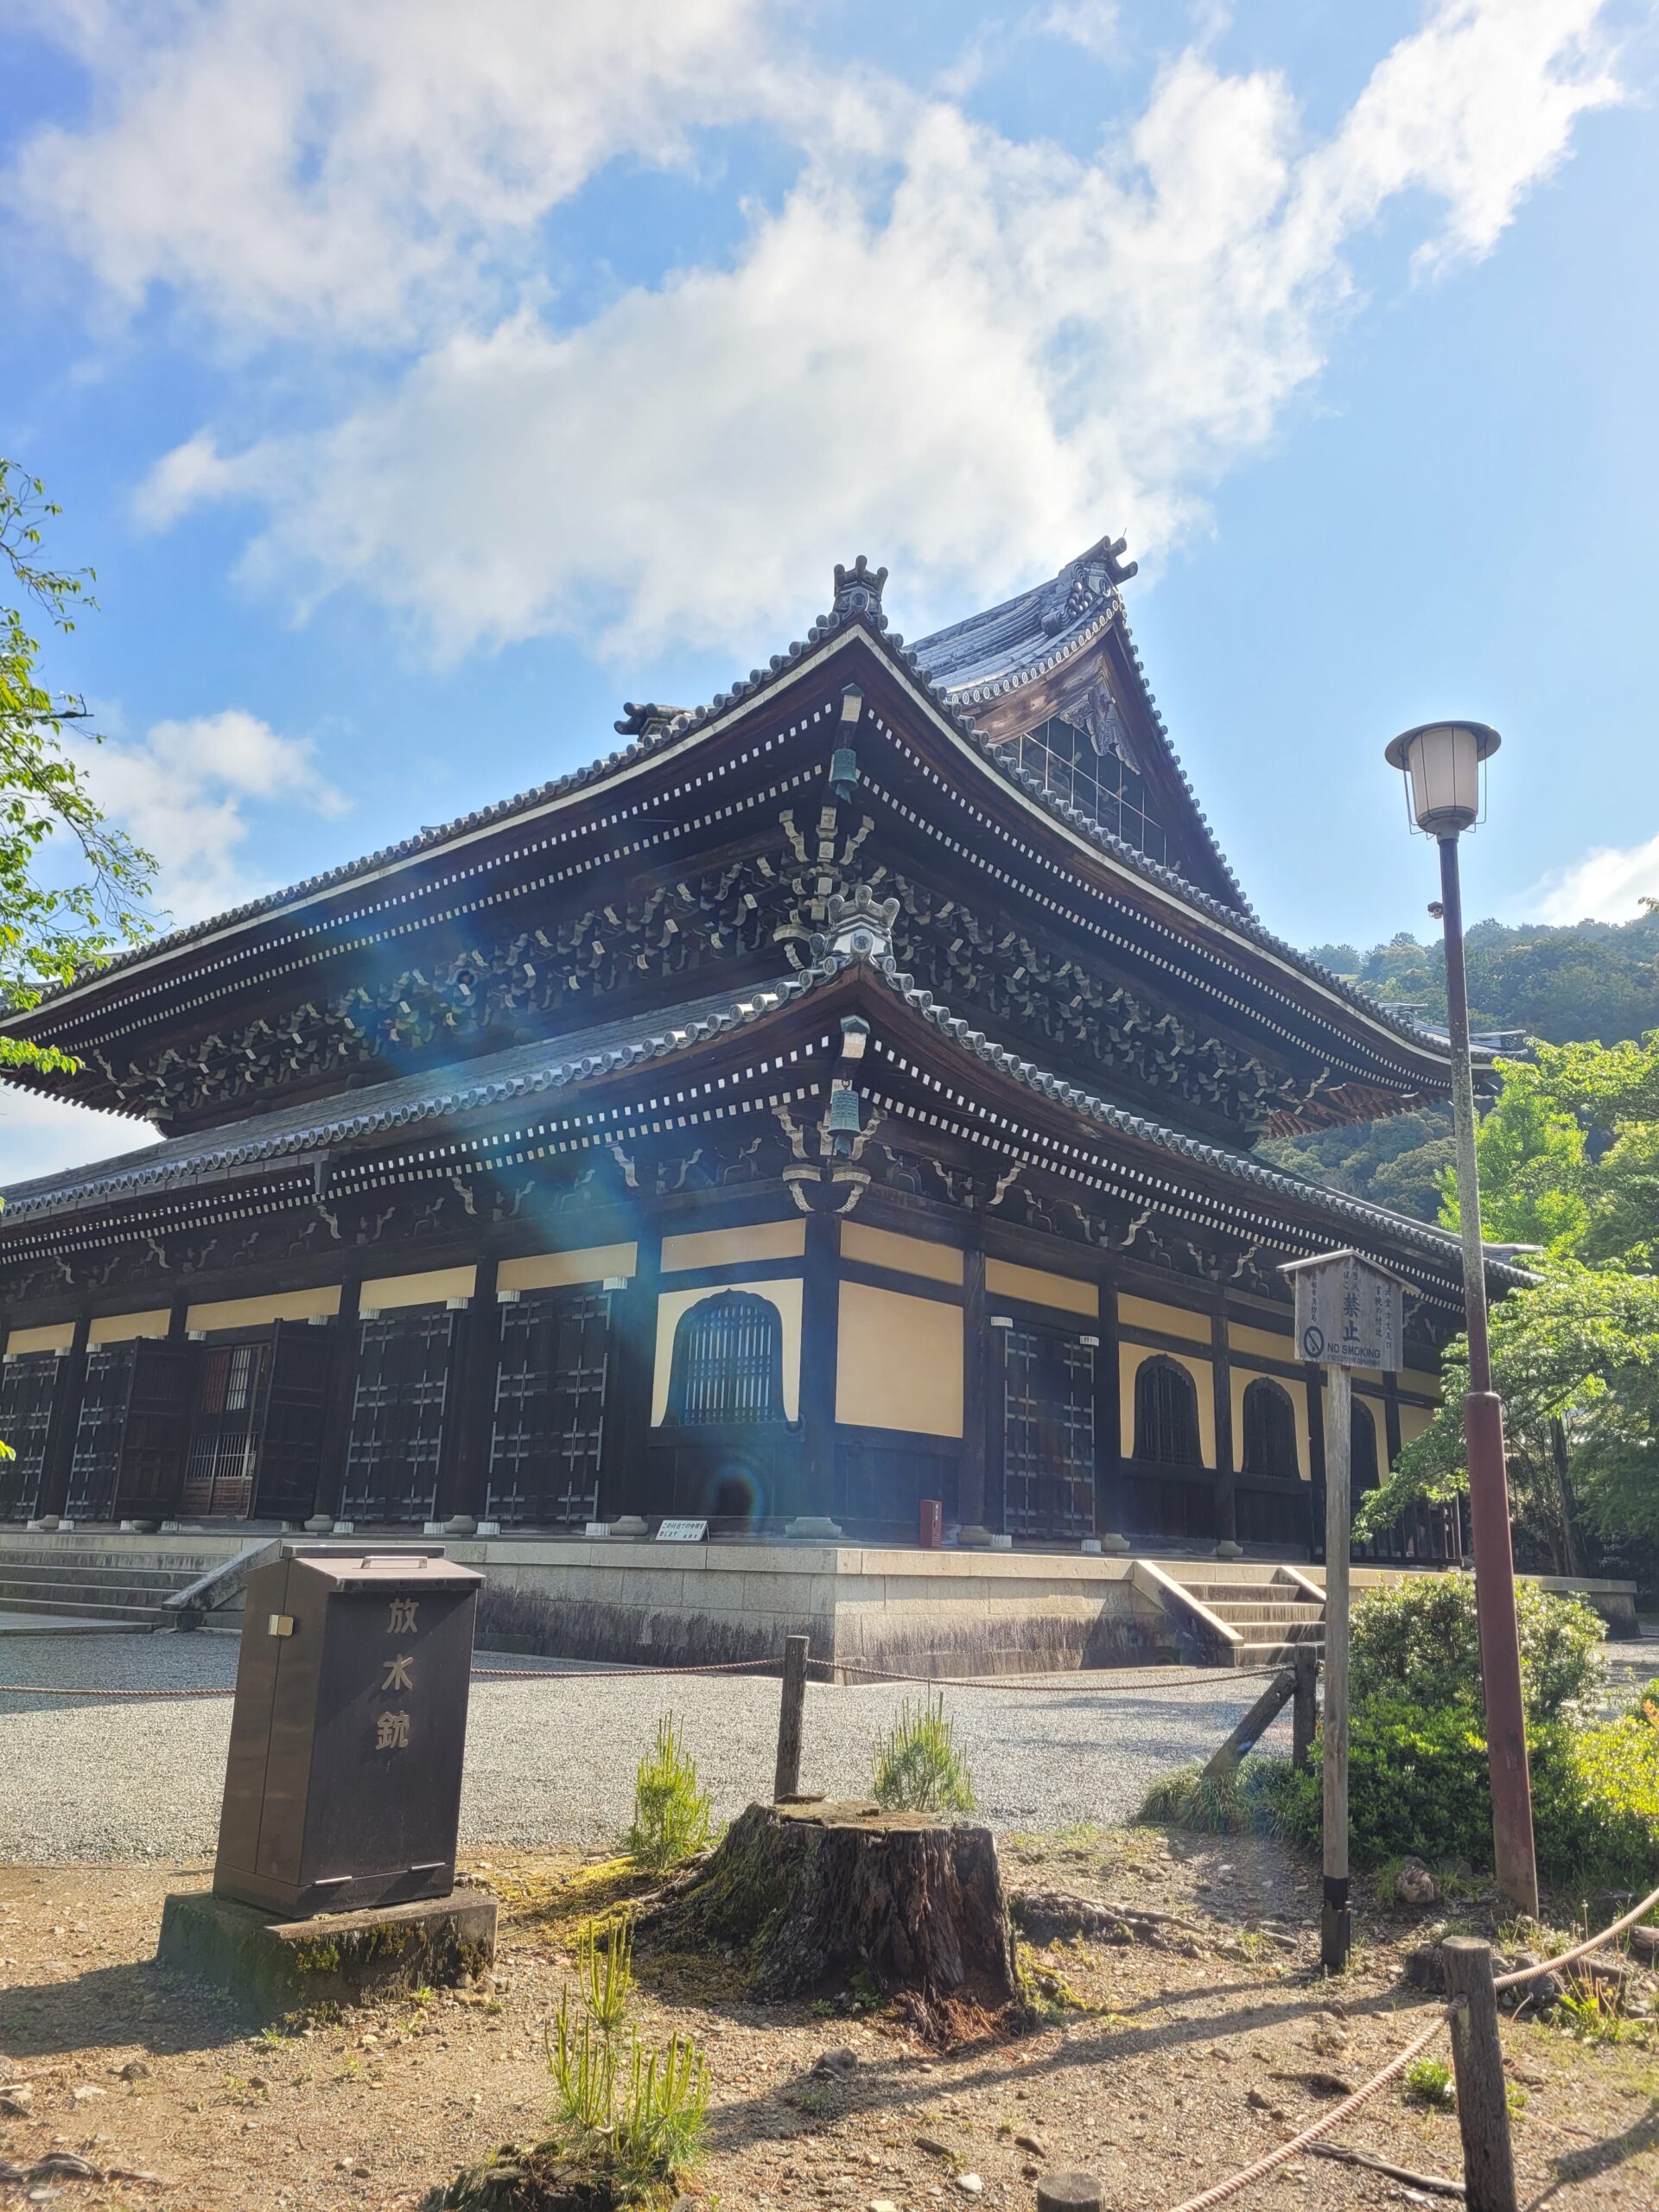 Nanzenji Temple is one of Kyoto’s most underrated destinations